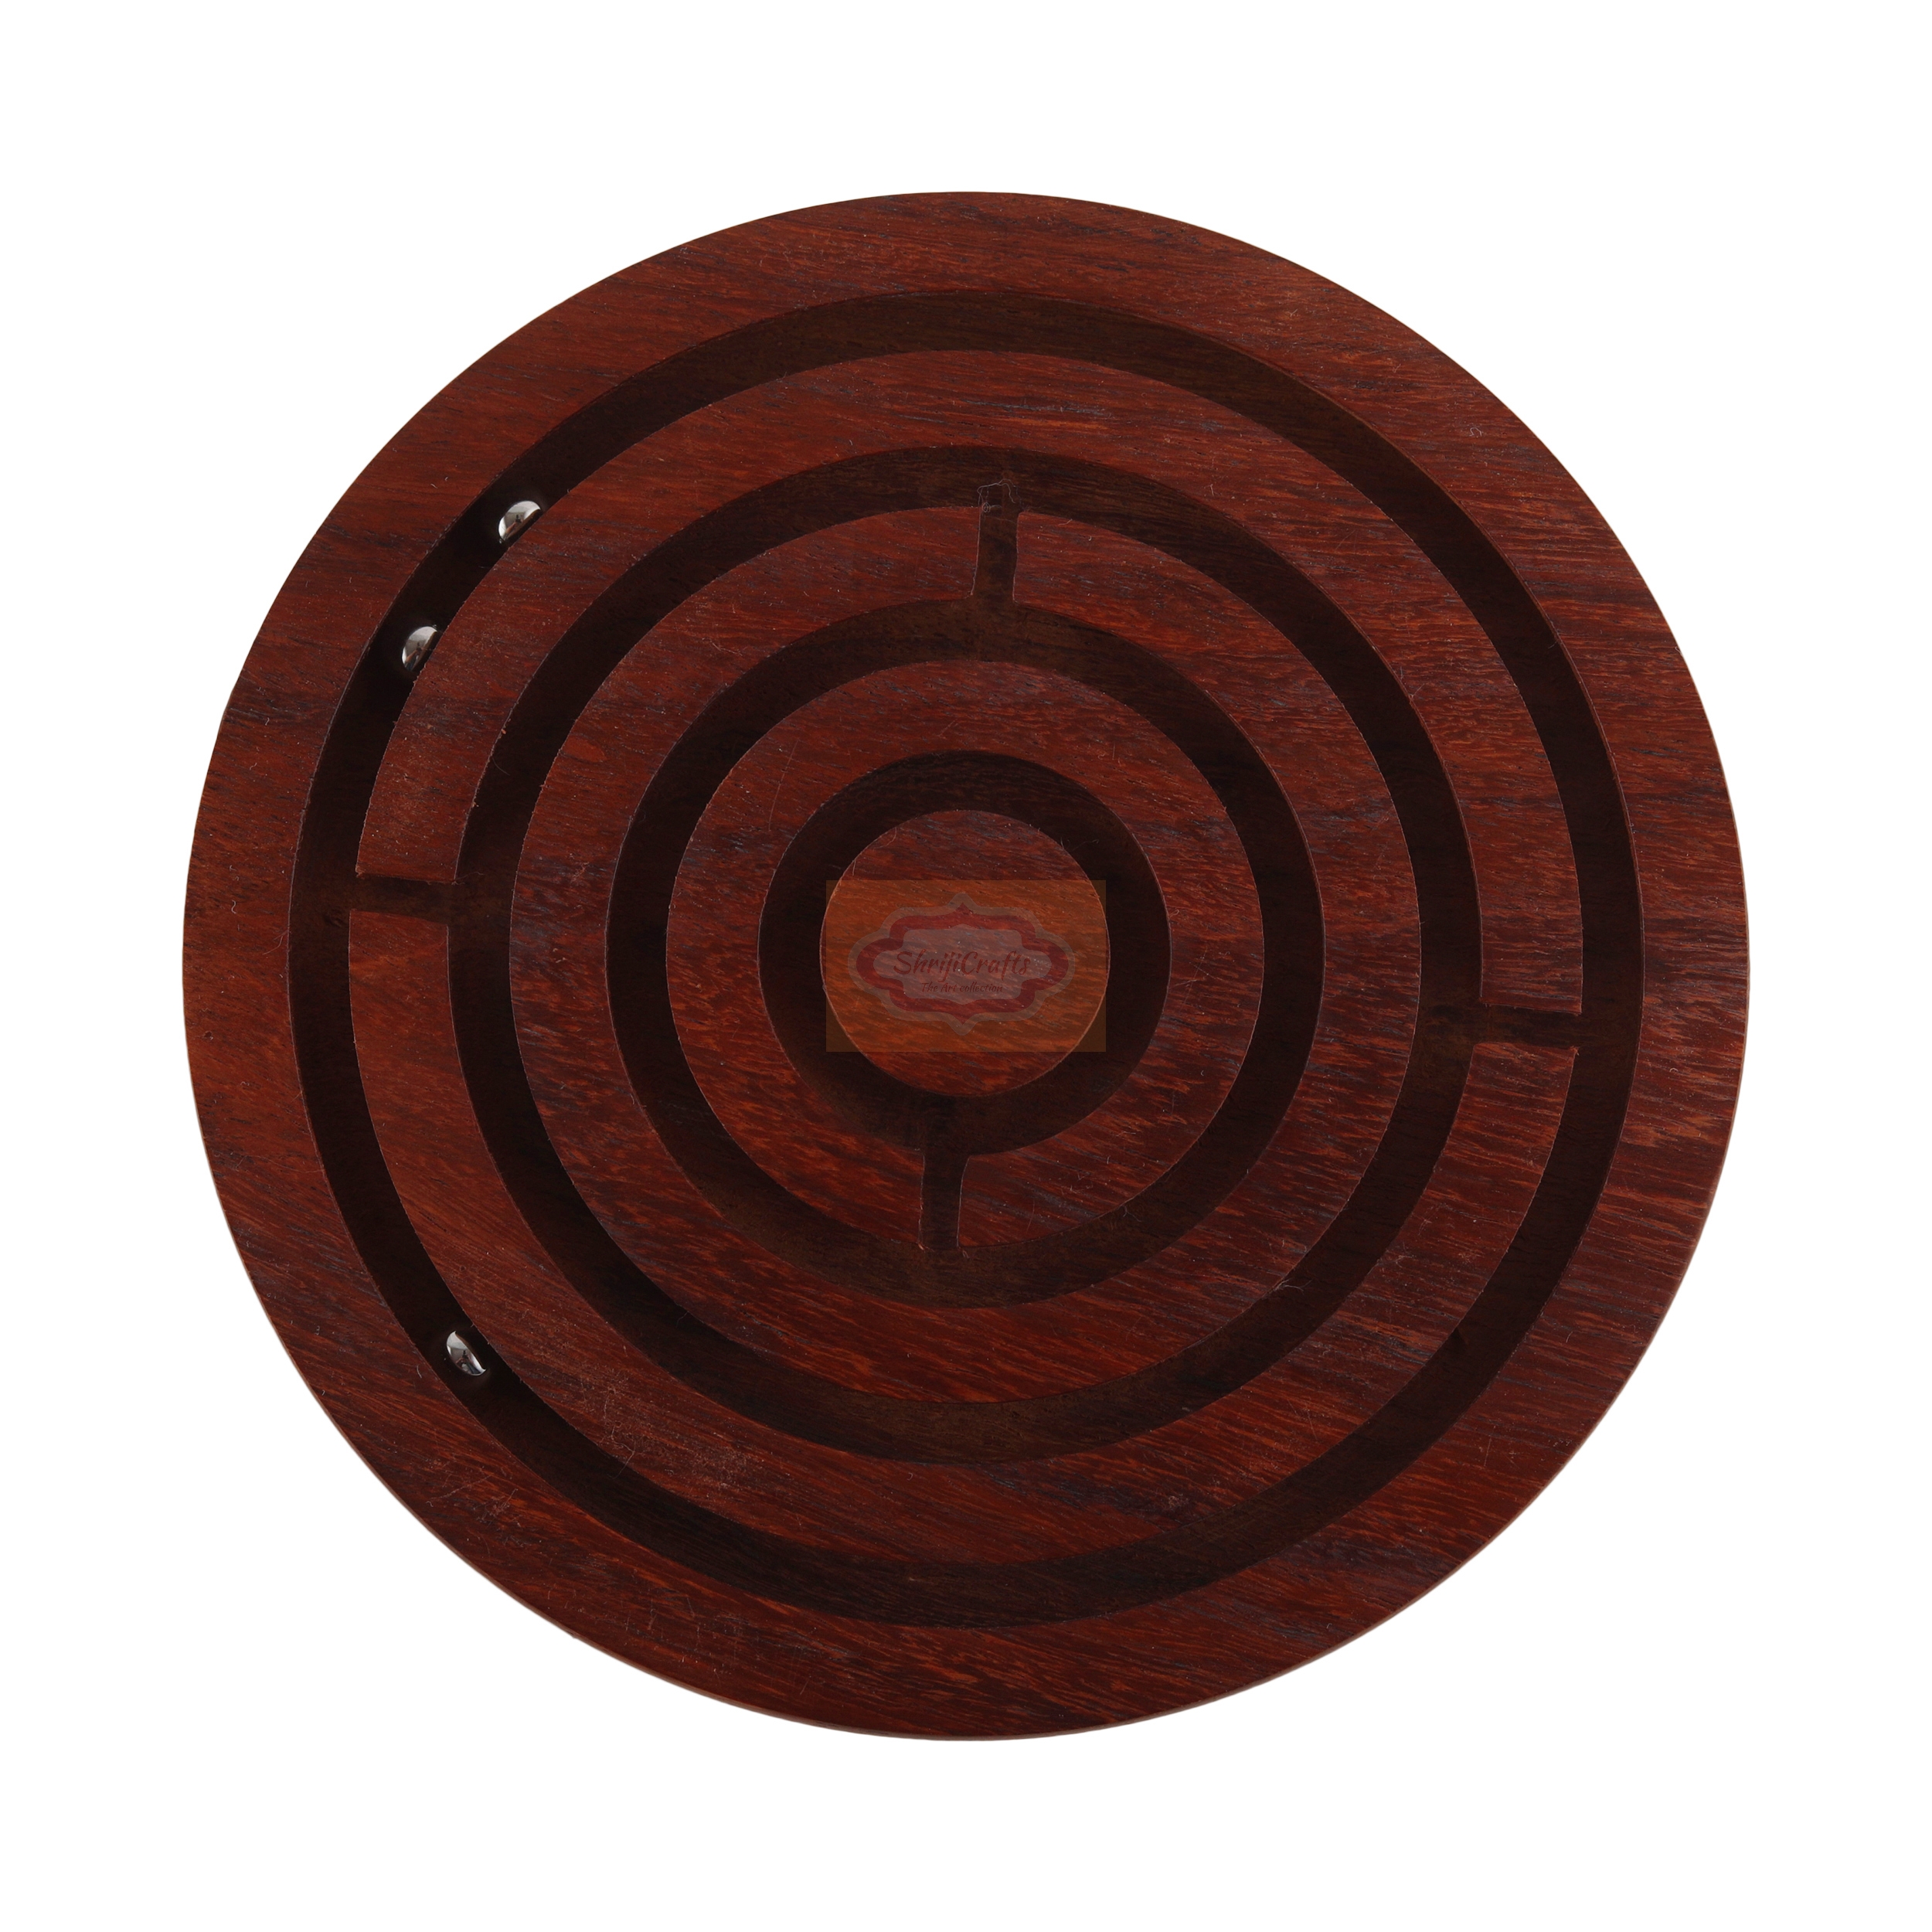 Shrijicrafts | ShrijiCrafts Wooden Labyrinth Ball-in-a-Maze Puzzle Game (Dia - 4 Inches) 2